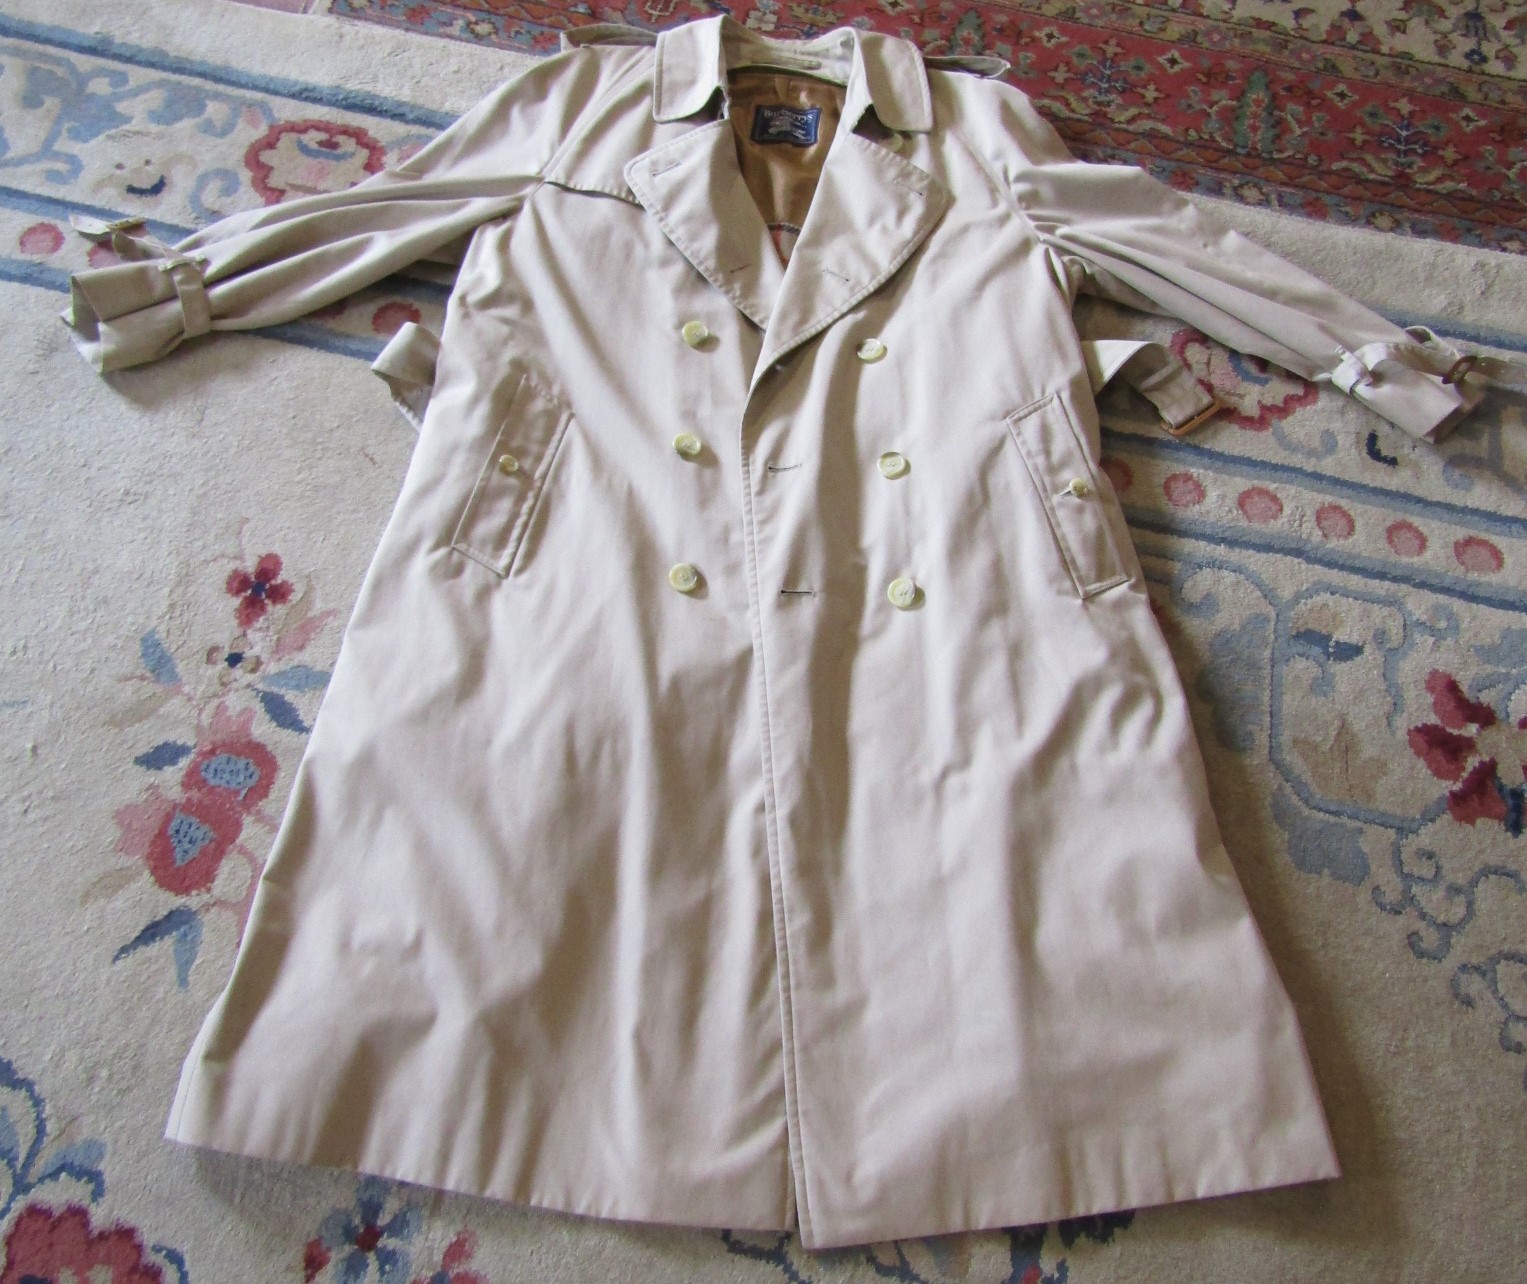 Vintage Burberry rain coat / mac / trench coat with detachable lining - size 52 reg - - Image 10 of 20